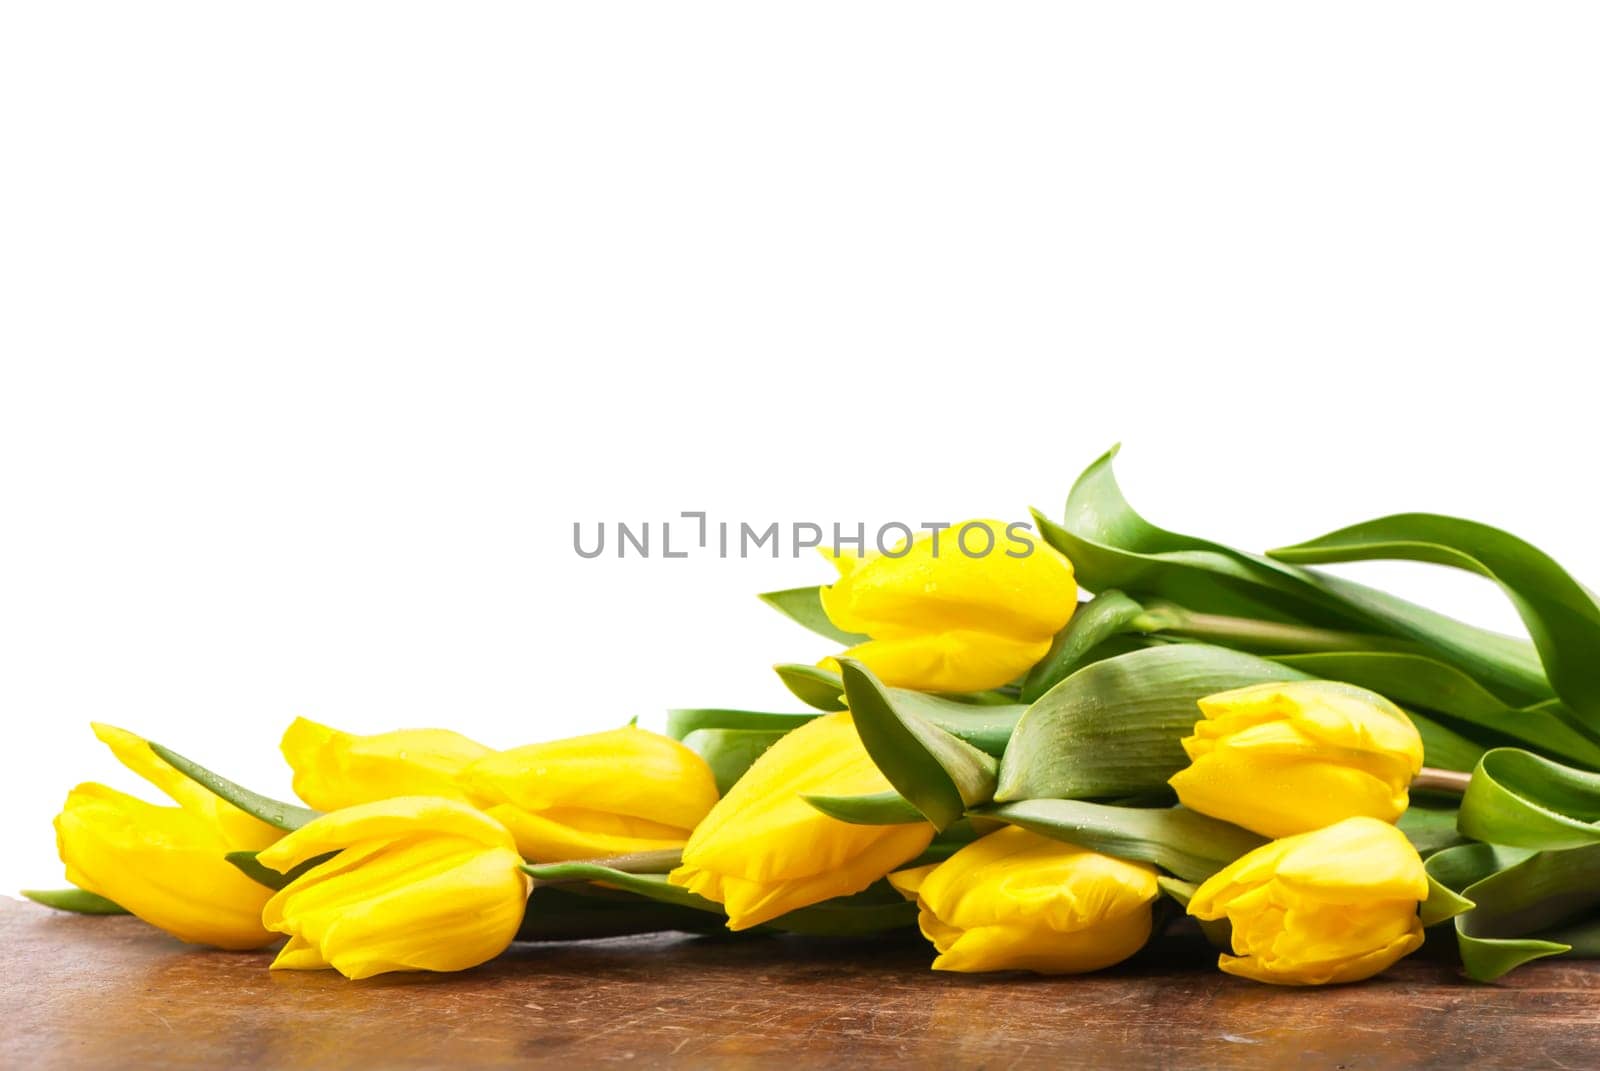 beautiful yellow tulips are isolated on a wooden and white background. Yellow flowers lie on wooden board on white background by aprilphoto